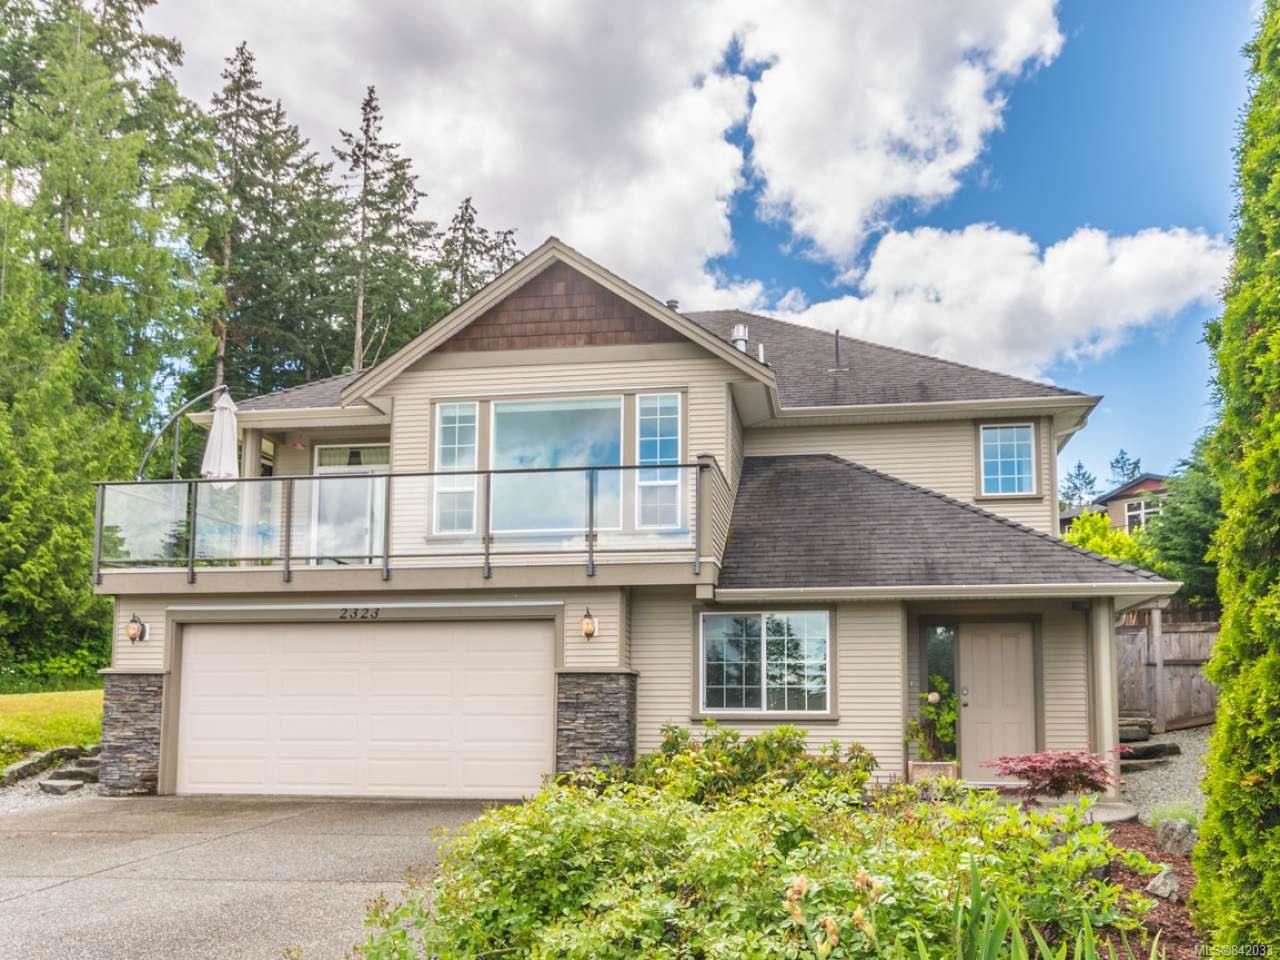 Main Photo: 2323 GLENFORD PLACE in NANAIMO: Na Chase River House for sale (Nanaimo)  : MLS®# 842033